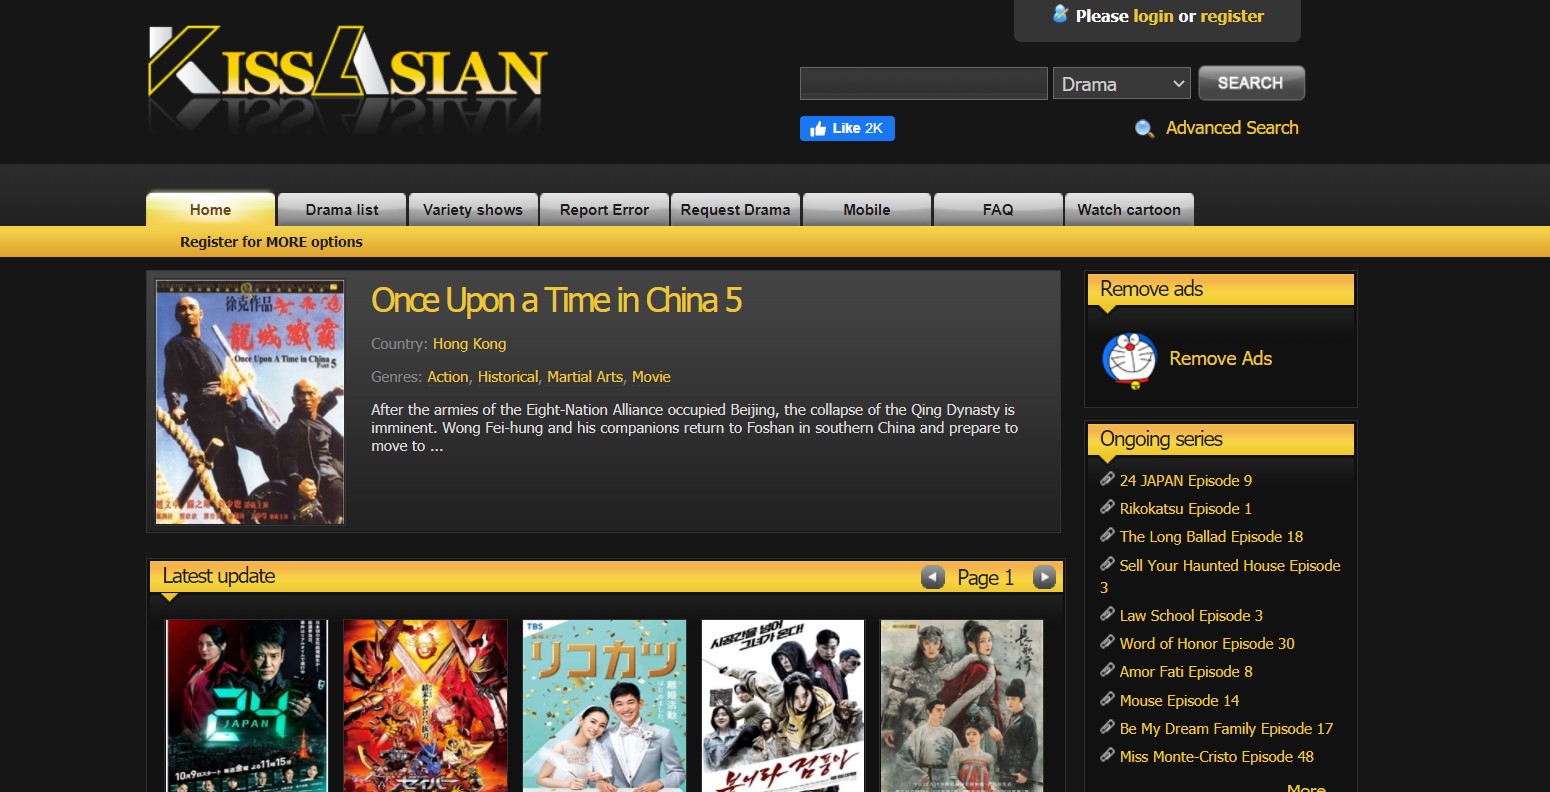 Find detailed information about KissAsian